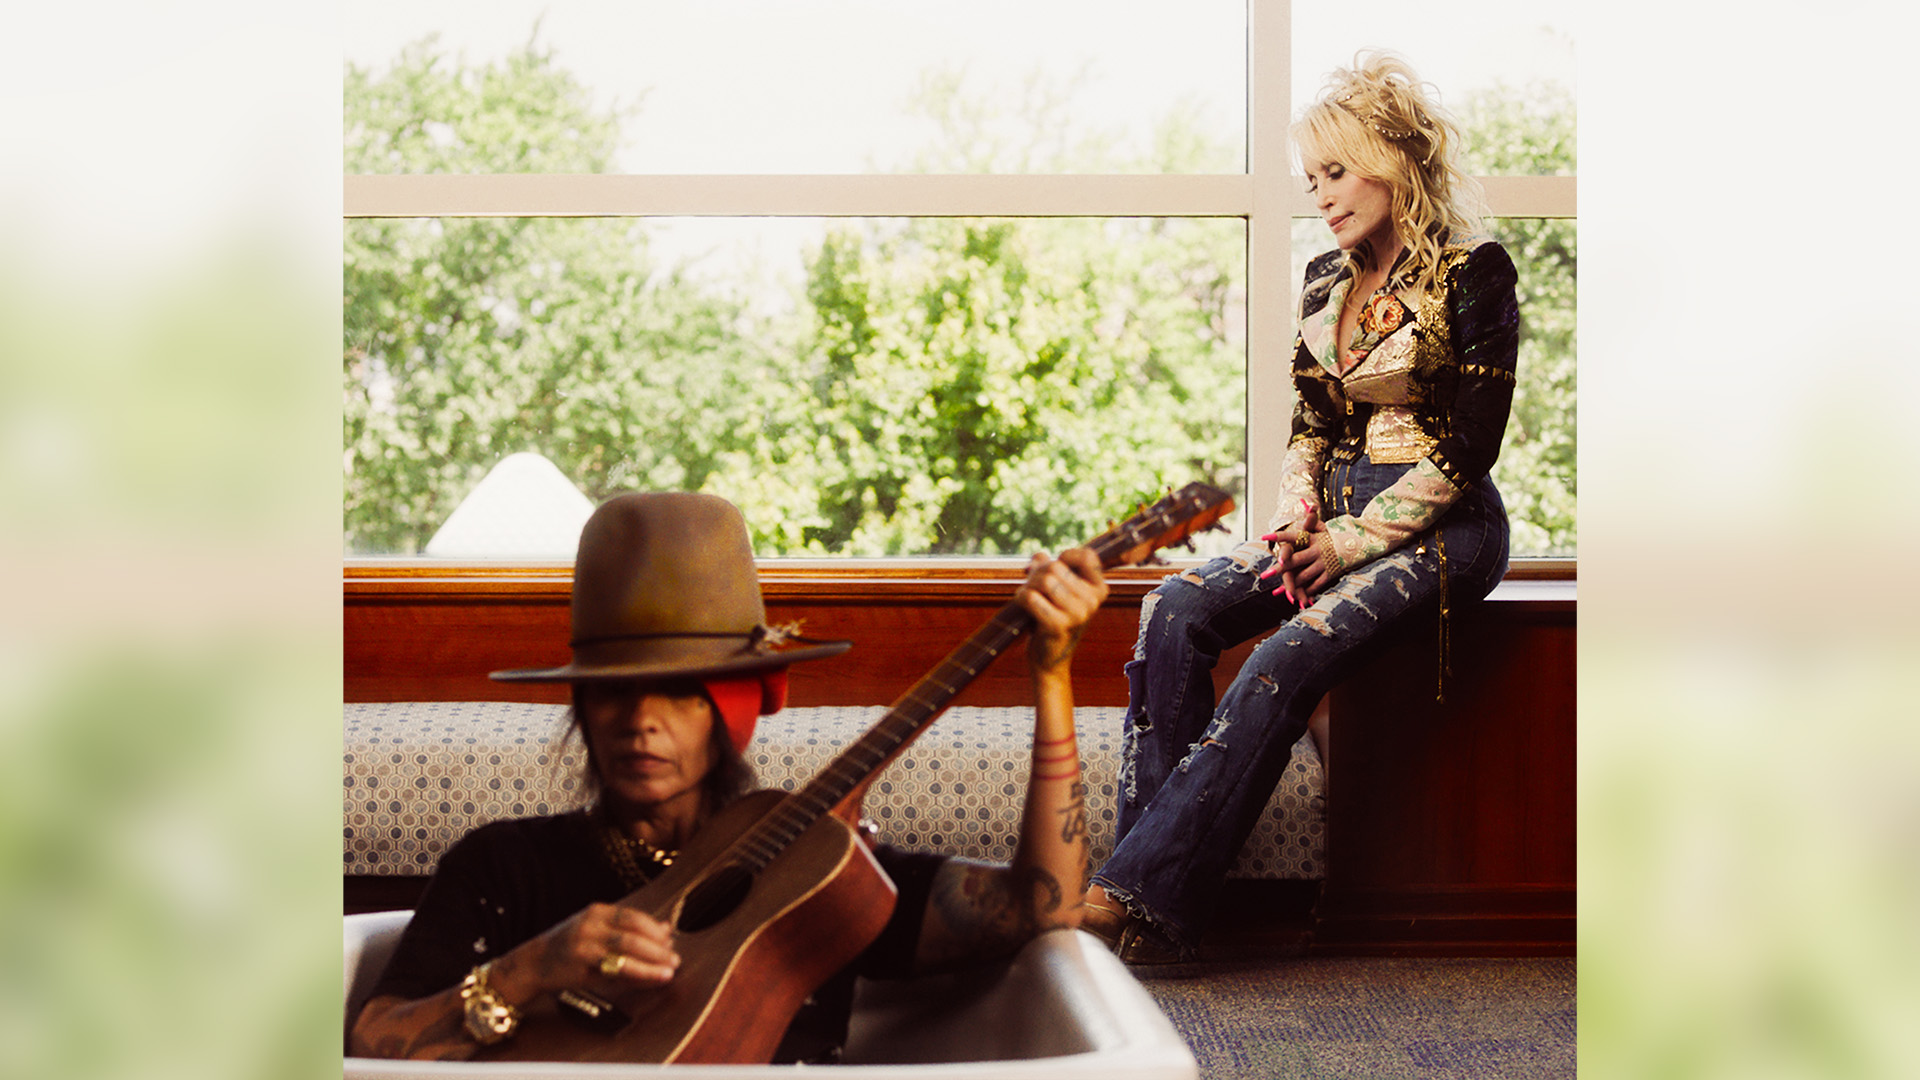 Dolly Parton and Linda Perry's Emotional Collaboration Will Leave You Speechless - What's Up? 12